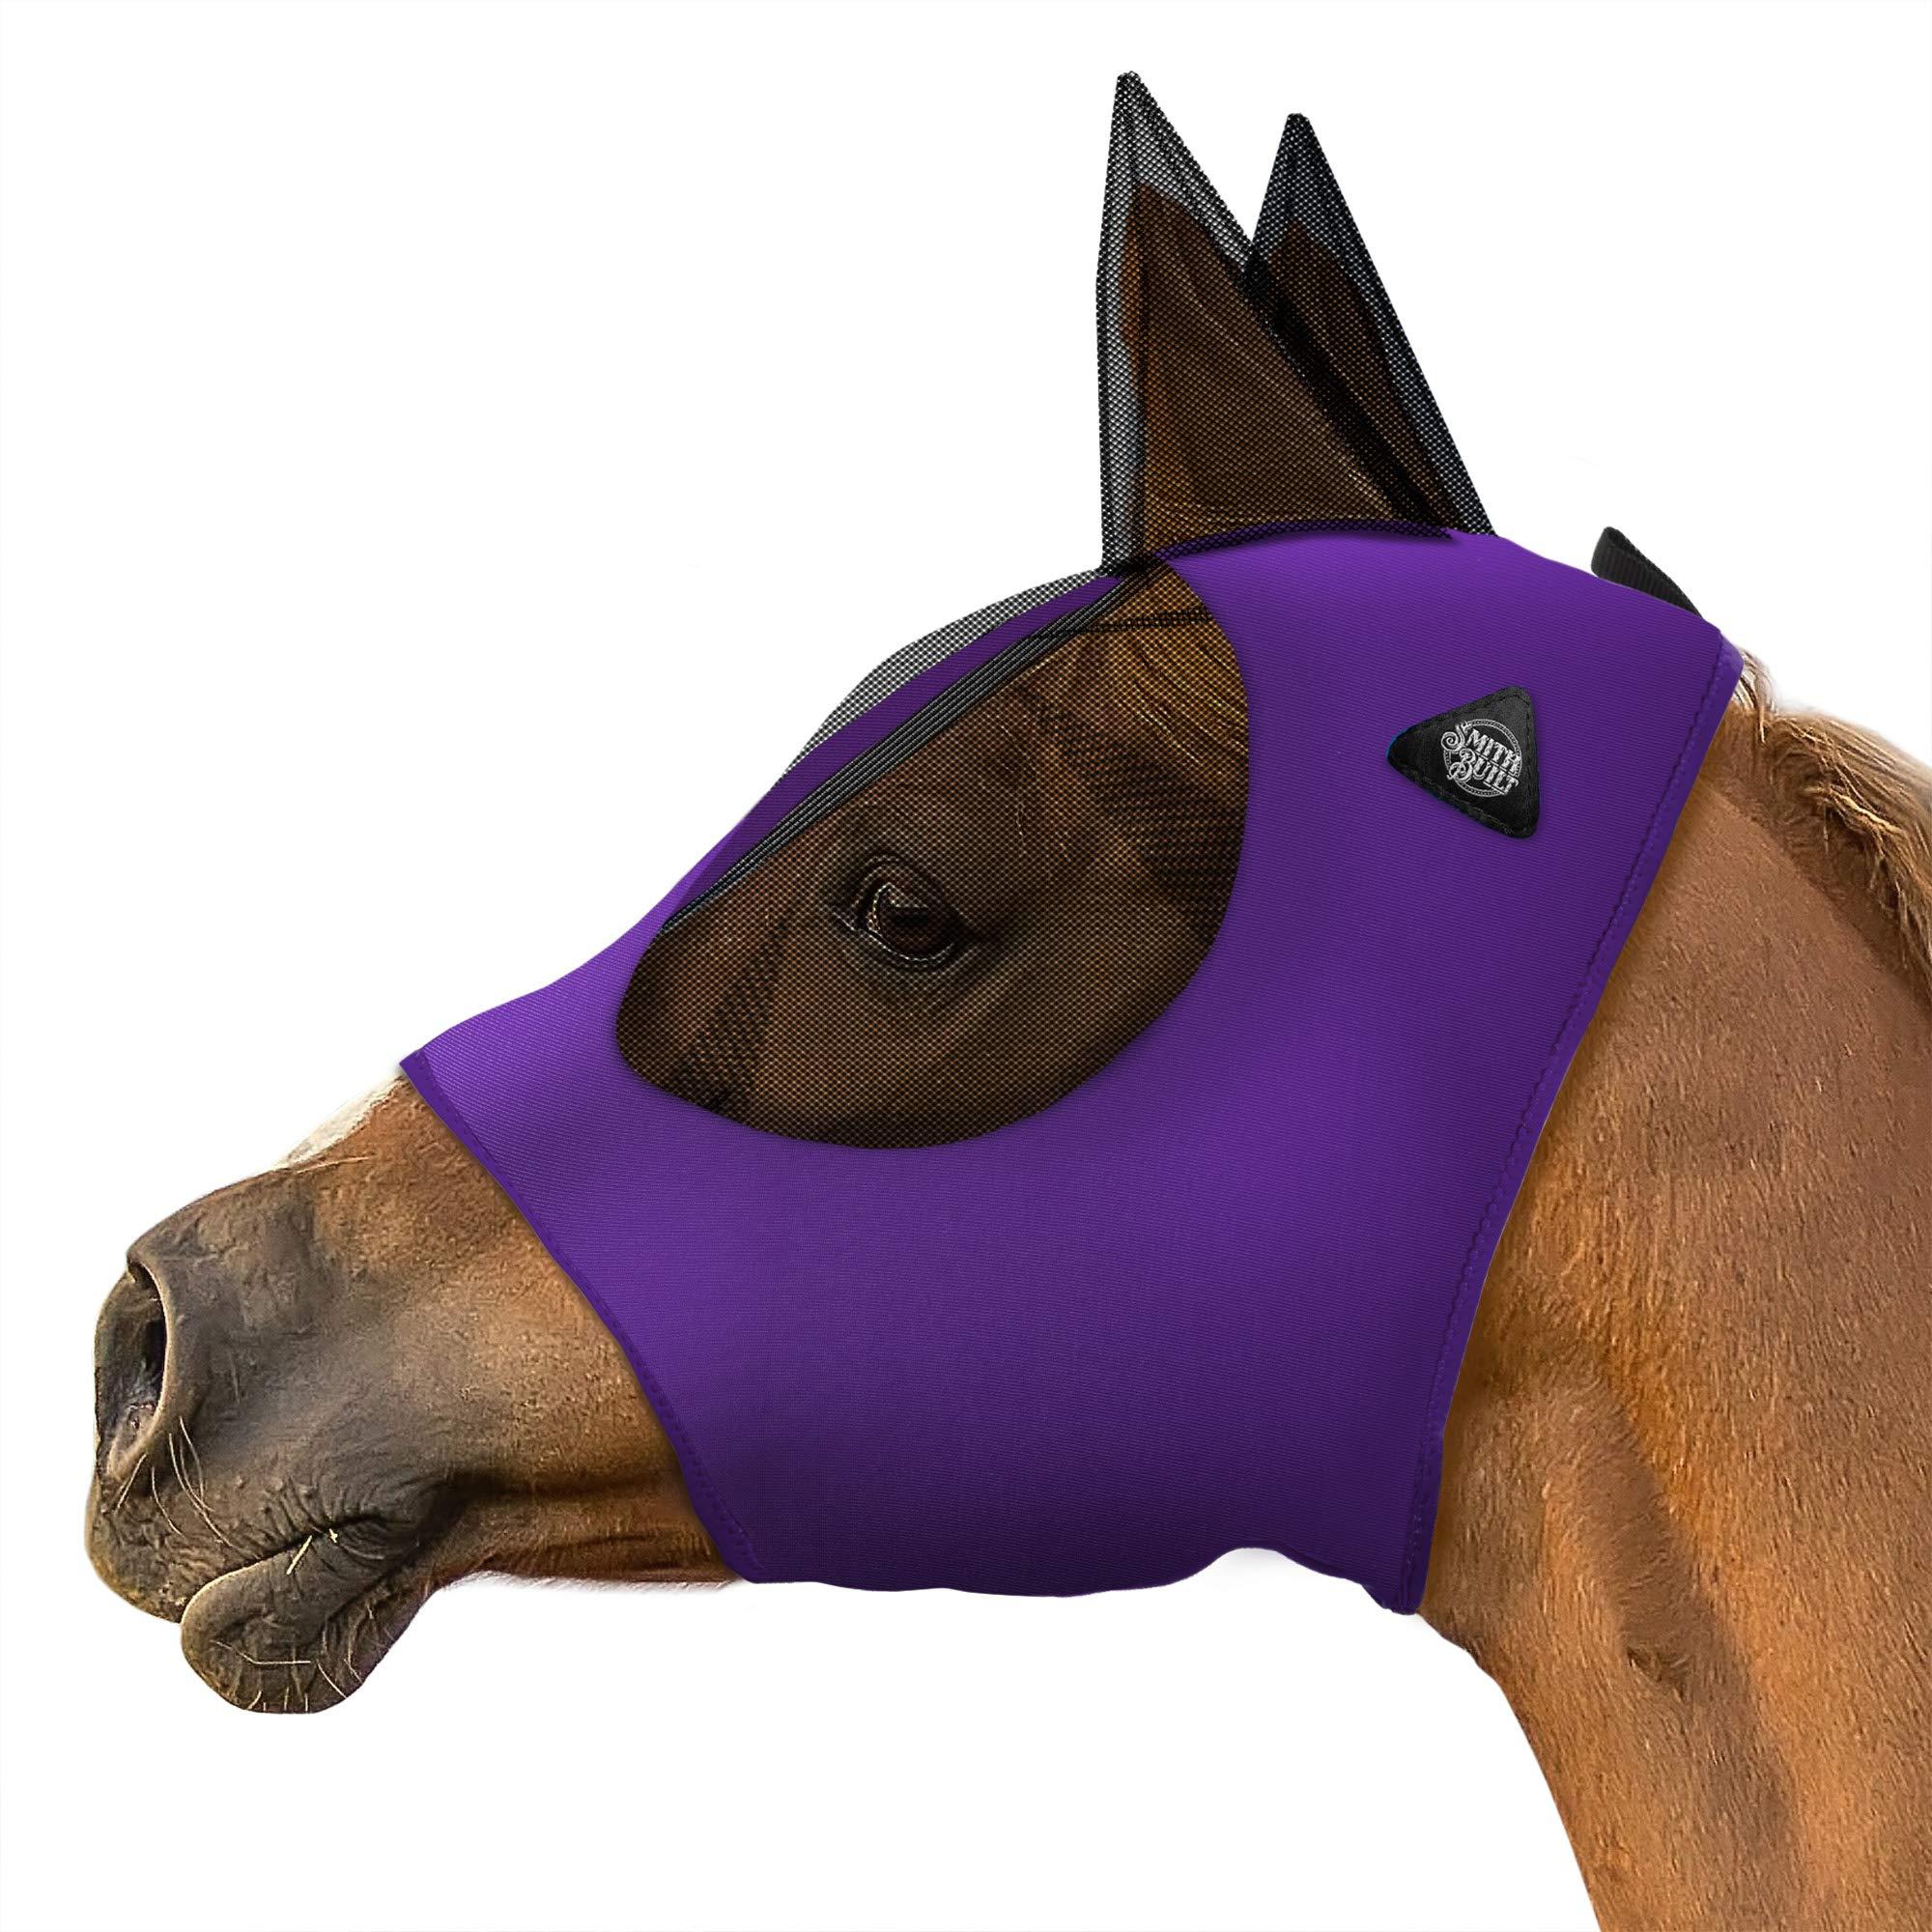 SmithBuilt Horse Fly Mask (Purple, Horse) - Mesh Eyes and Ears, Breathable Fabric, UV Protection